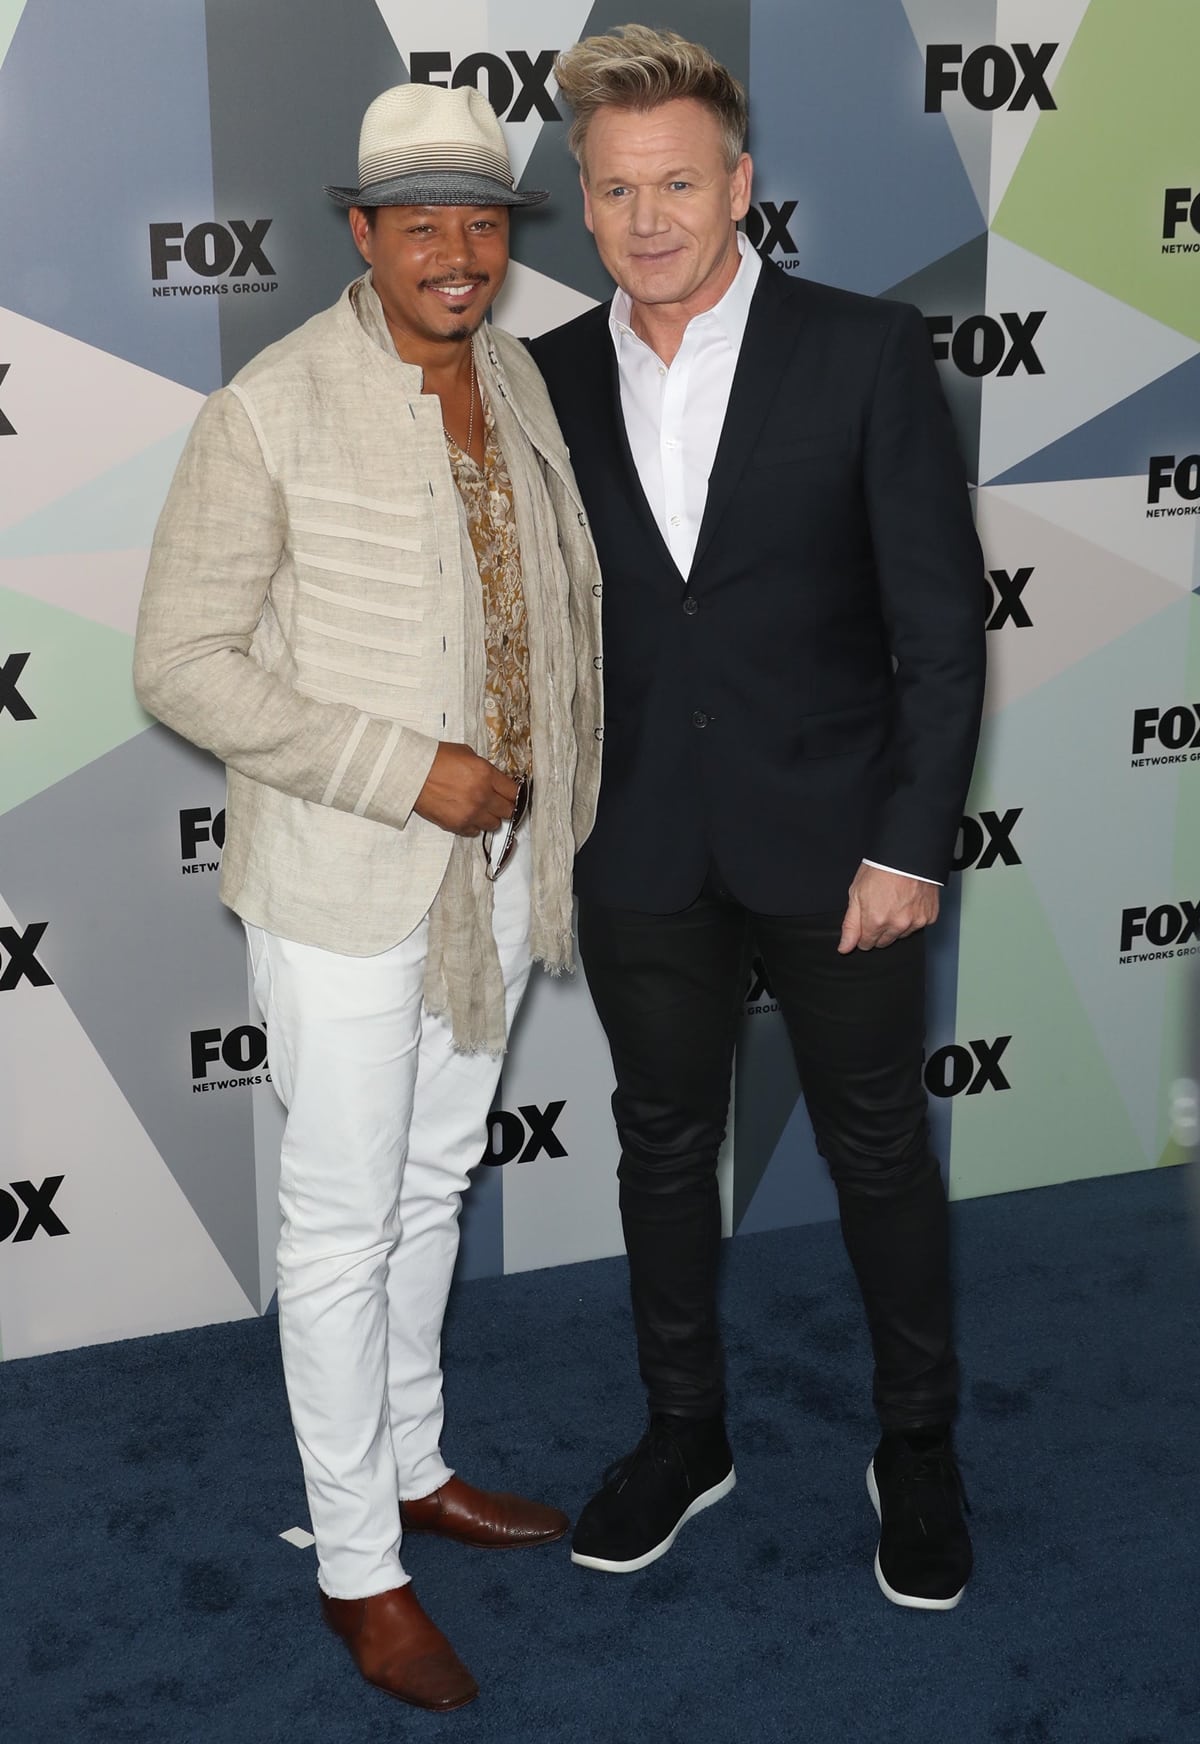 Terrence Howard and Gordon Ramsay promote the American competitive cooking reality TV show MasterChef